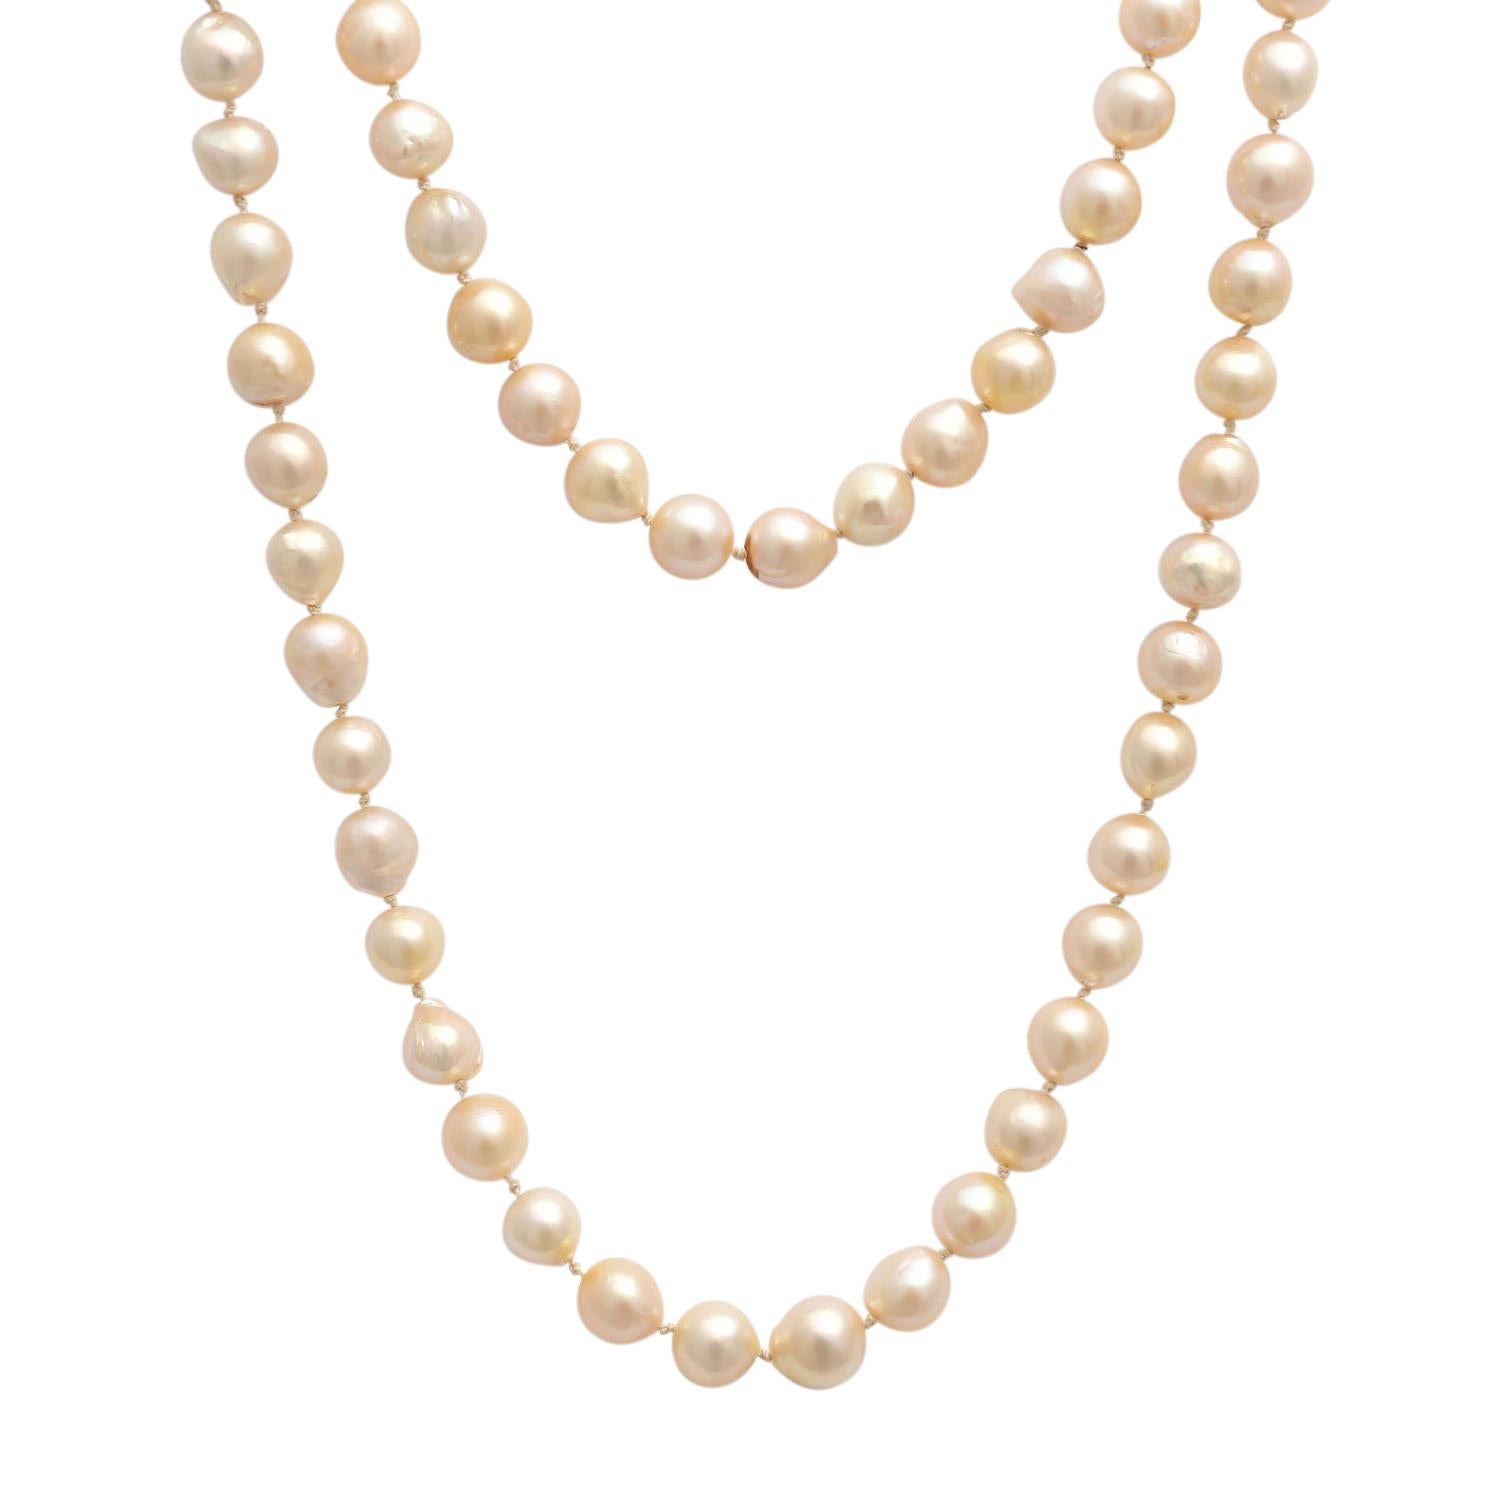 Extra long chain of Akoya pearls, 14K clasp with rubies, L: approx. 188 cm, baroque cultured pearls, approx. 8.7-9.6 mm, light-dark cream-colored, partly color treated, nat. WMM, slight signs of wear.

Long string of Akoyapearls, clasp WG 14 with